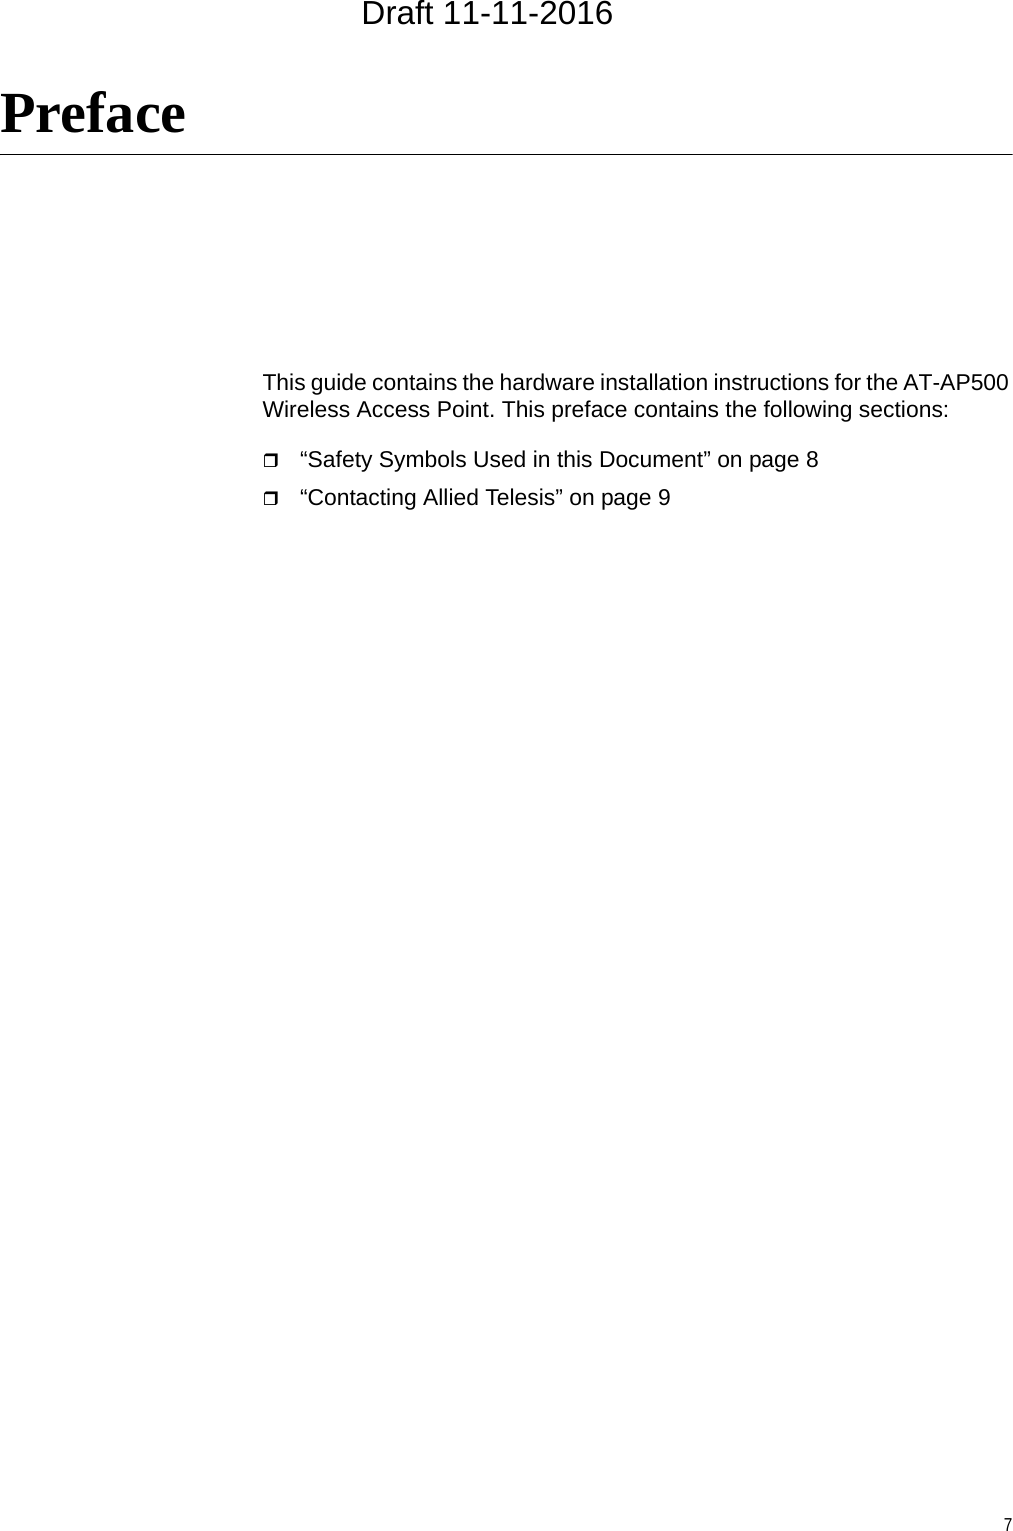 7PrefaceThis guide contains the hardware installation instructions for the AT-AP500 Wireless Access Point. This preface contains the following sections:“Safety Symbols Used in this Document” on page 8“Contacting Allied Telesis” on page 9Draft 11-11-2016